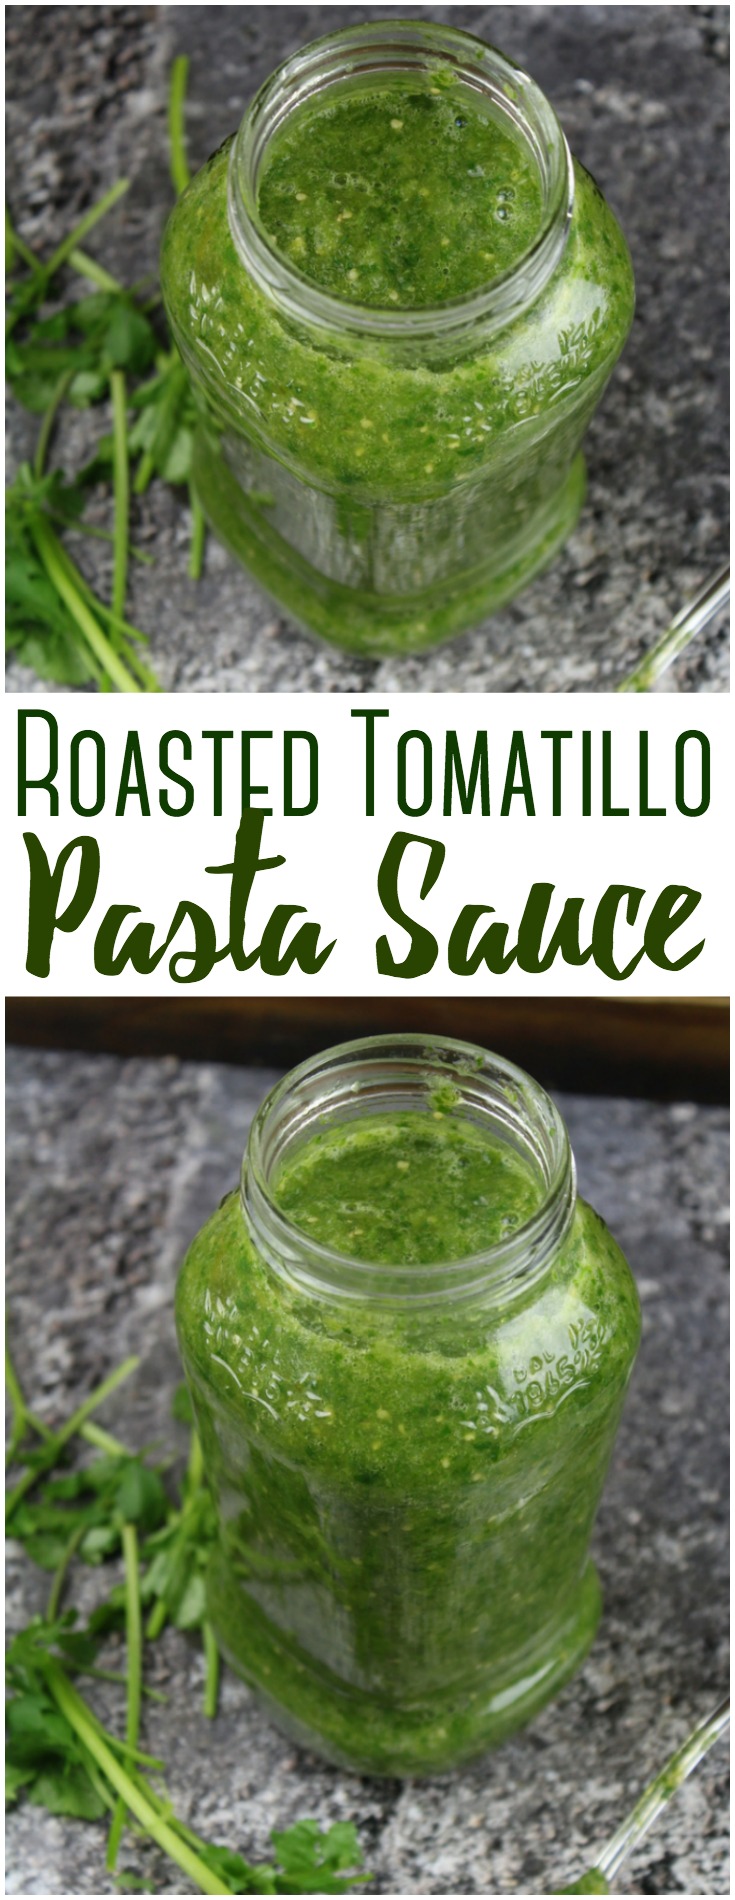 Roasted Tomatillo Pasta Sauce - Roasted tomatillos combine with onions, pepper and garlic to make a beautiful sauce with some kick to stir into your favorite pasta recipe!  #sauce #tomatillo #pasta #healthy #sauce #rebootedmom